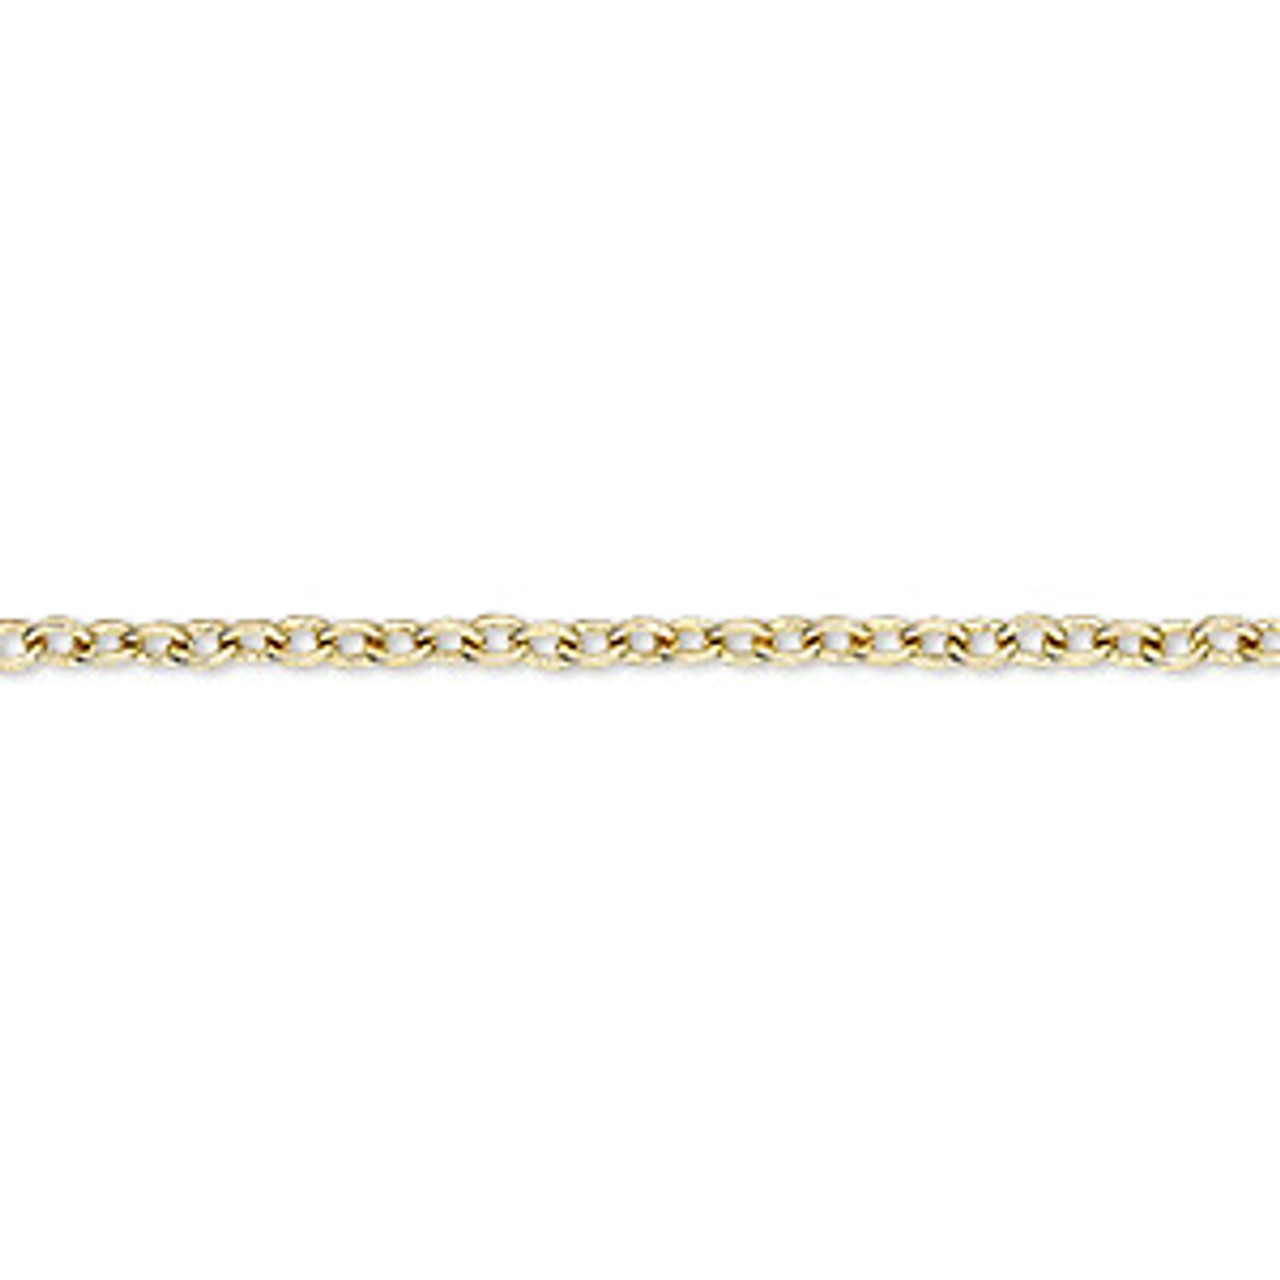 2.2mm Gold Plated Chain - 2 Foot Package